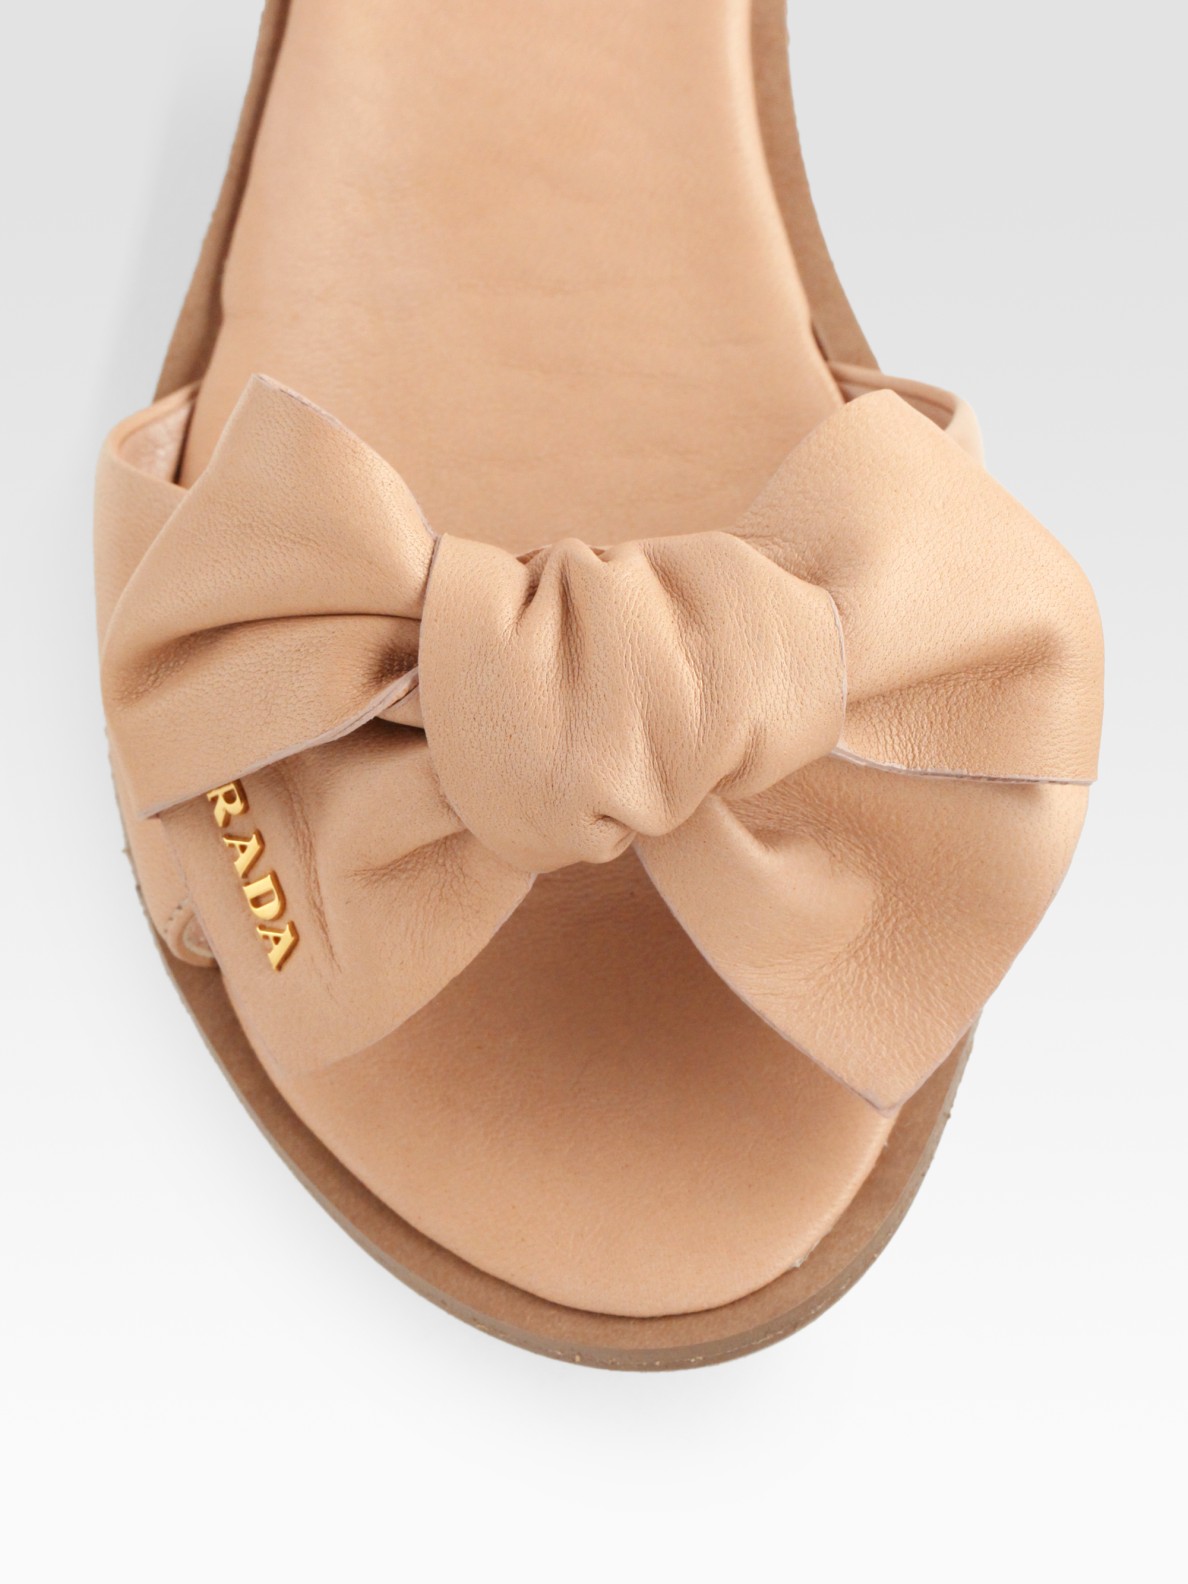 Prada Leather Bow Flat Slides in Brown | Lyst